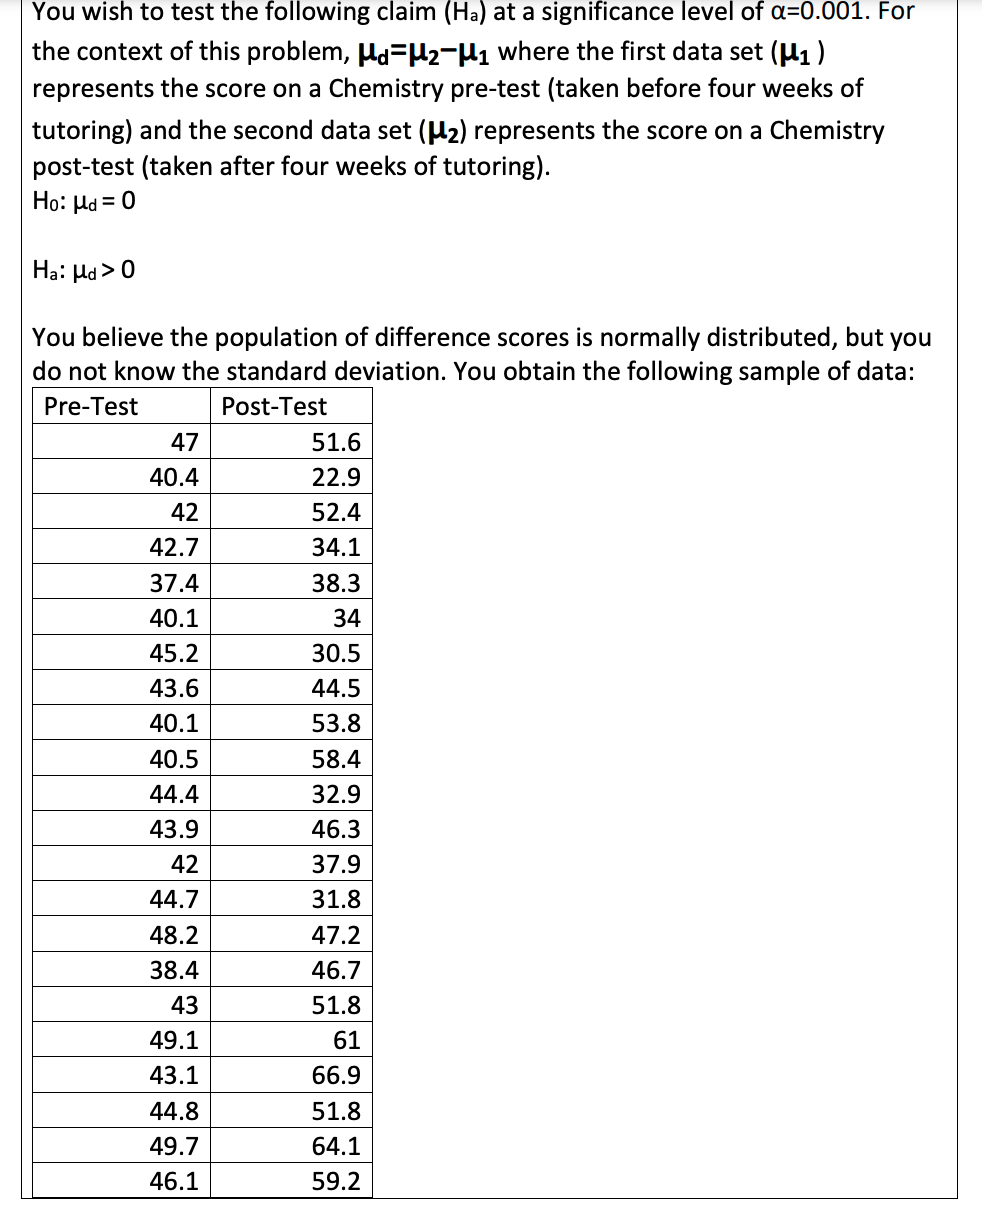 You wish to test the following claim (Ha) at a significance level of a=0.001. For
the context of this problem, µd=µ2-µ1 where the first data set (µ1)
represents the score on a Chemistry pre-test (taken before four weeks of
tutoring) and the second data set (H2) represents the score on a Chemistry
post-test (taken after four weeks of tutoring).
Ho: Hd = 0
Ha: Hd > 0
You believe the population of difference scores is normally distributed, but you
do not know the standard deviation. You obtain the following sample of data:
Pre-Test
Post-Test
47
51.6
40.4
22.9
42
52.4
42.7
34.1
37.4
38.3
40.1
34
45.2
30.5
43.6
44.5
40.1
53.8
40.5
58.4
44.4
32.9
43.9
46.3
42
37.9
44.7
31.8
48.2
47.2
38.4
46.7
43
51.8
49.1
61
43.1
66.9
44.8
51.8
49.7
64.1
46.1
59.2
